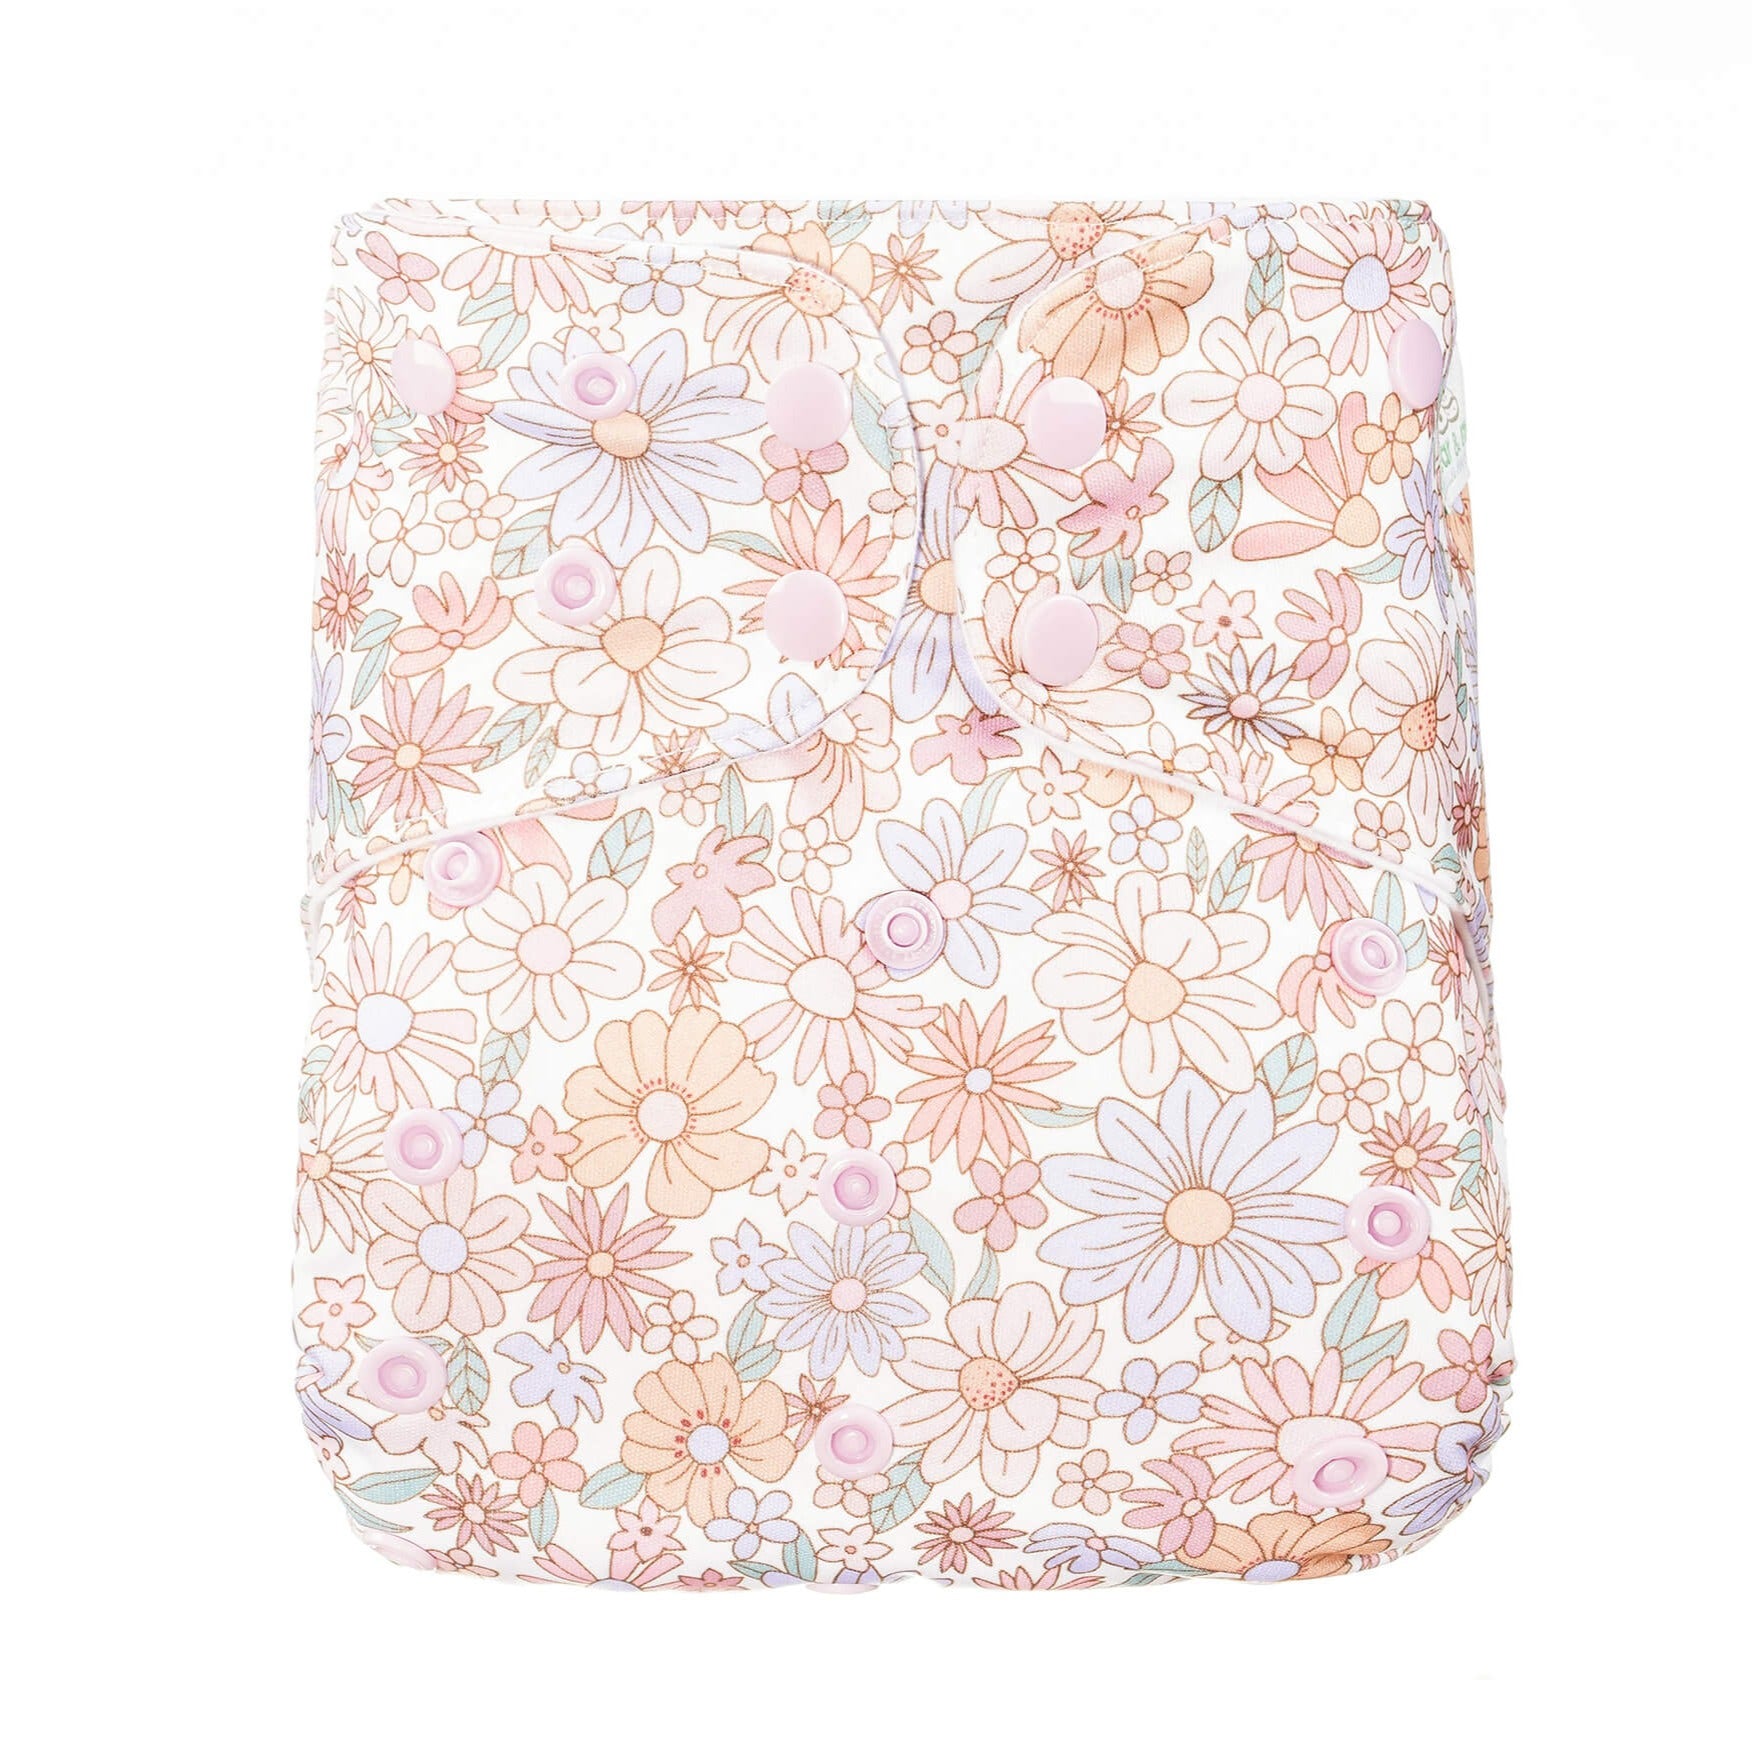 Bear & Moo Reusable Cloth Nappy in Floral Whimsy print